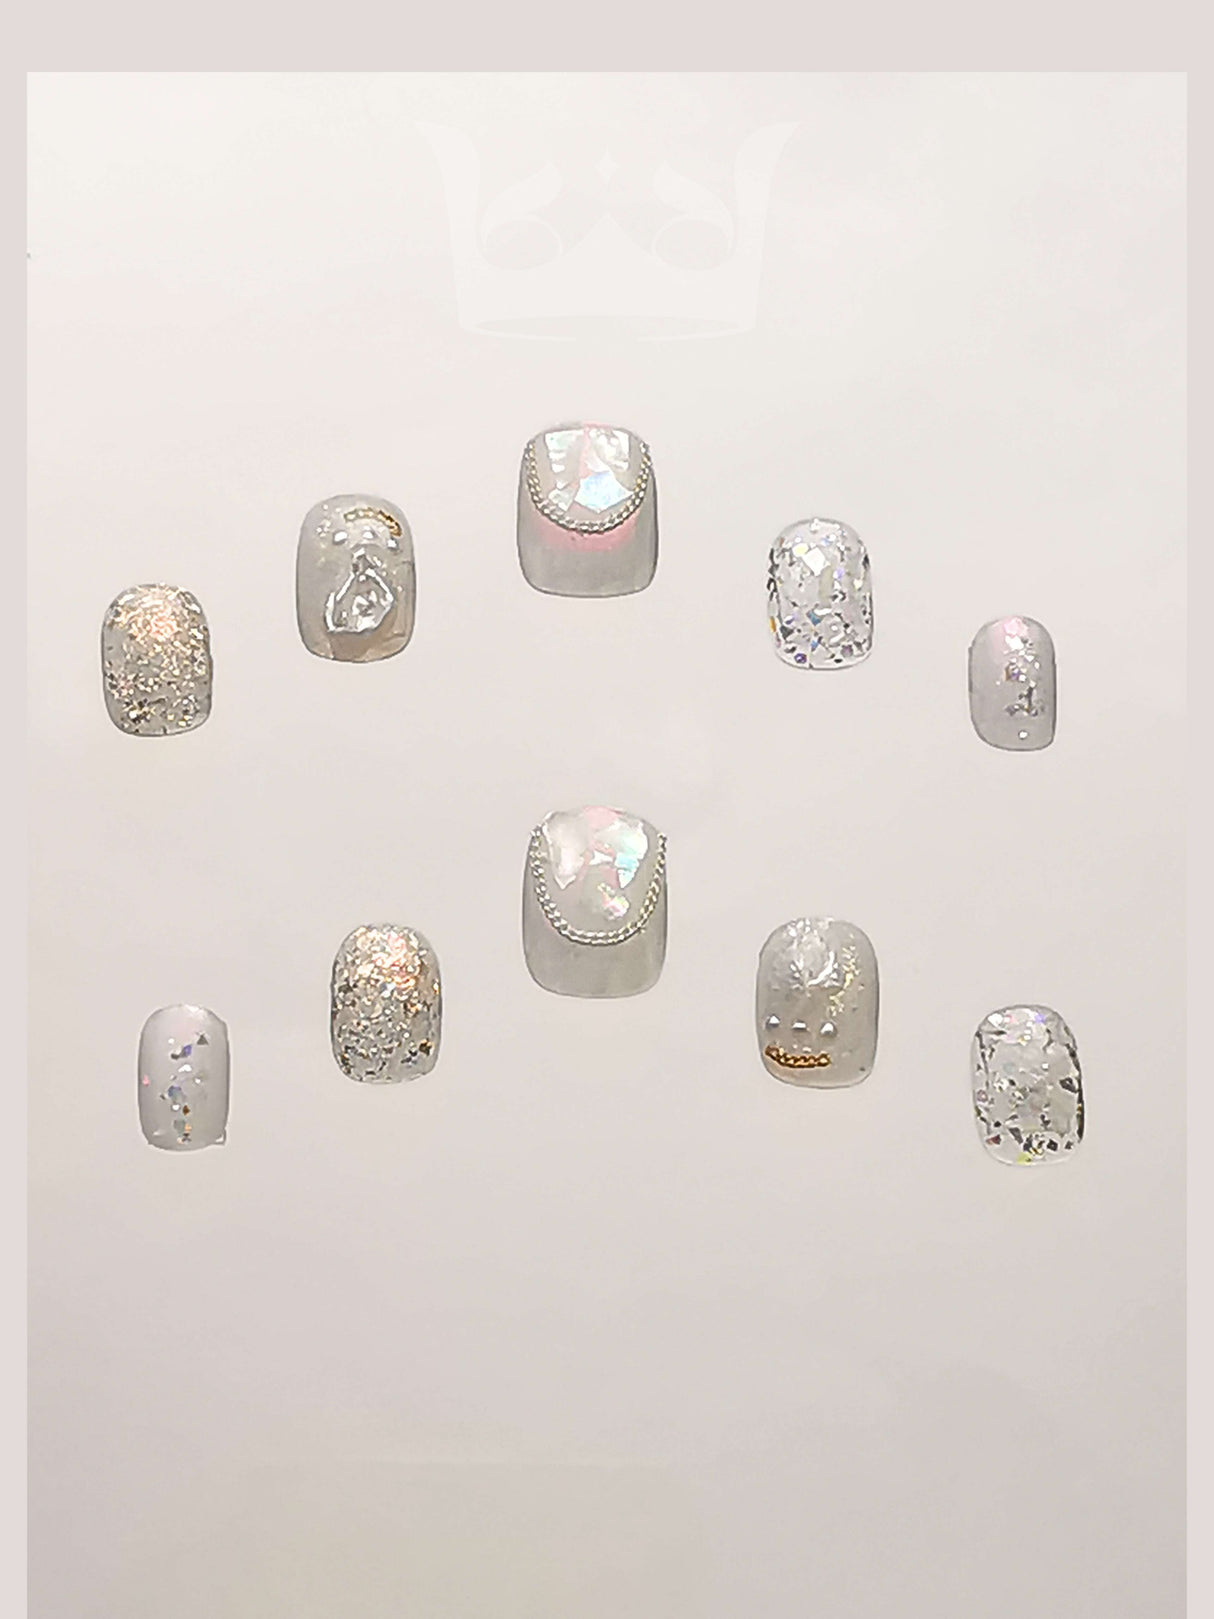 Glitter, iridescent accents, embellishments, and artistic designs make These press-on nails perfect for special occasions. Neutral base colors add elegance.